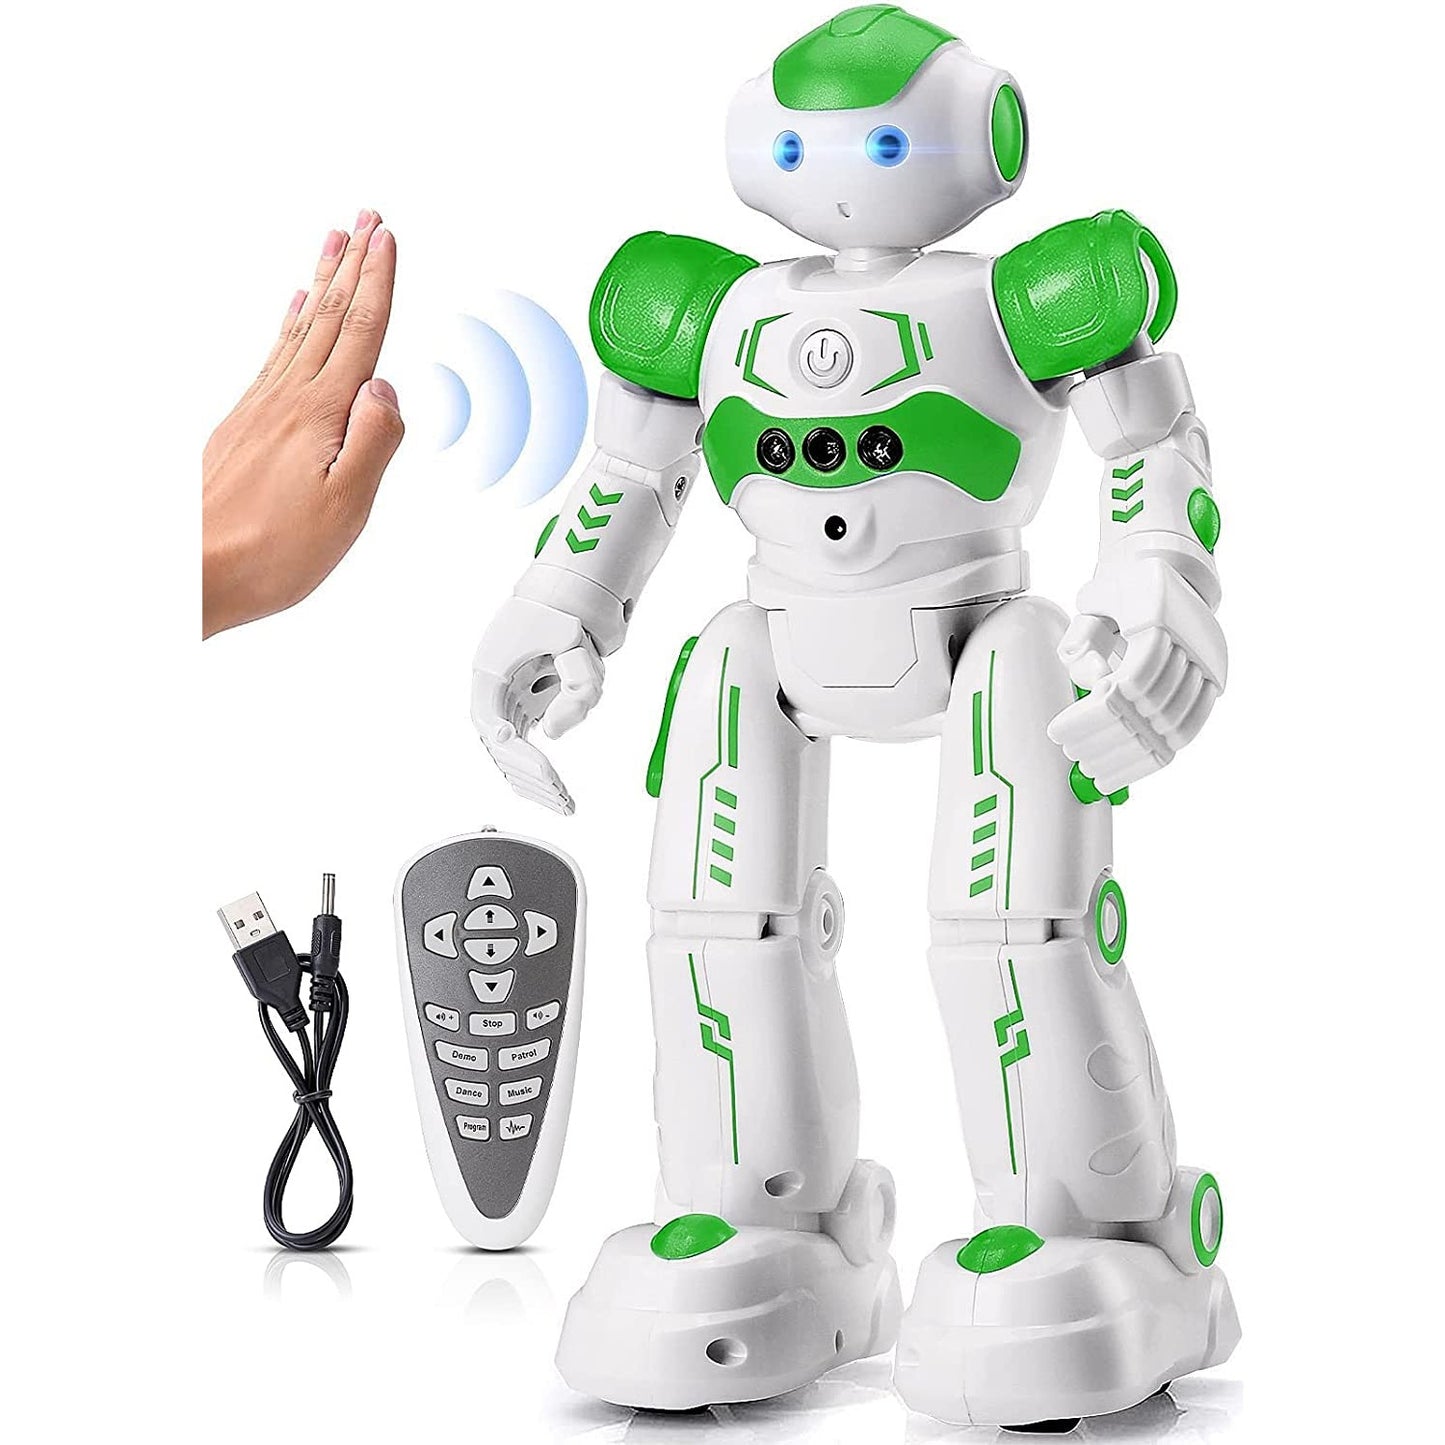 A green colored remote control robot along with a remote and USB charging cable.